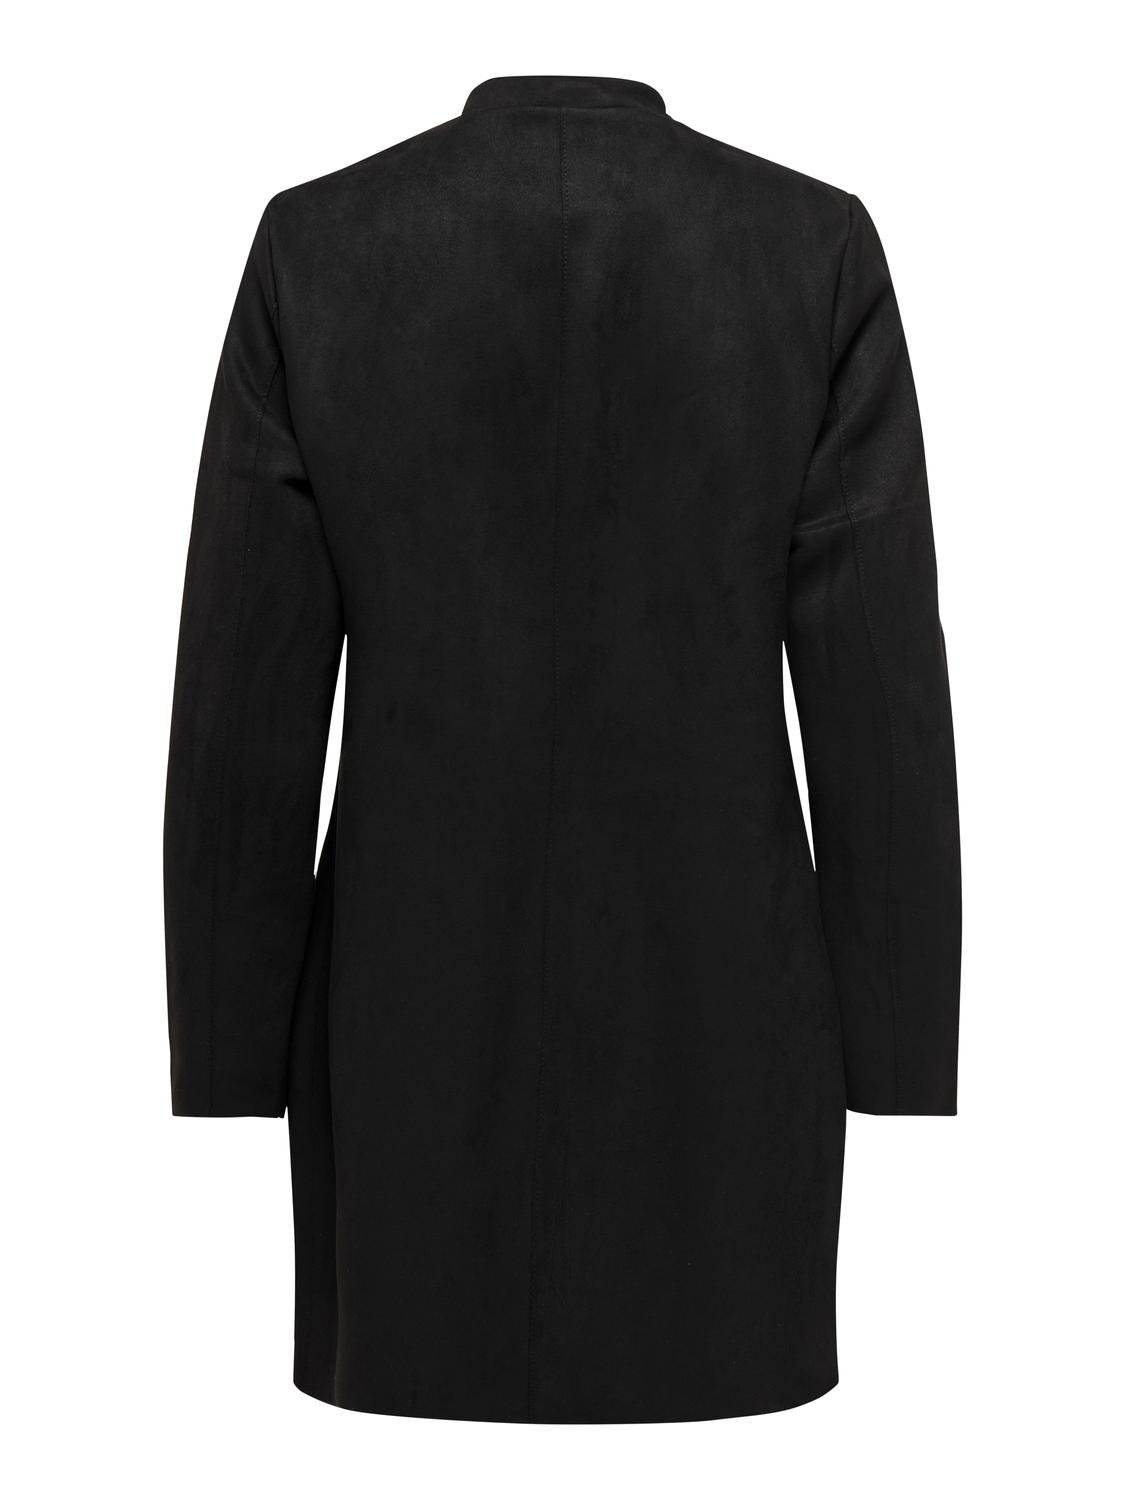 Faux suede fabric coat | Black | ONLY®